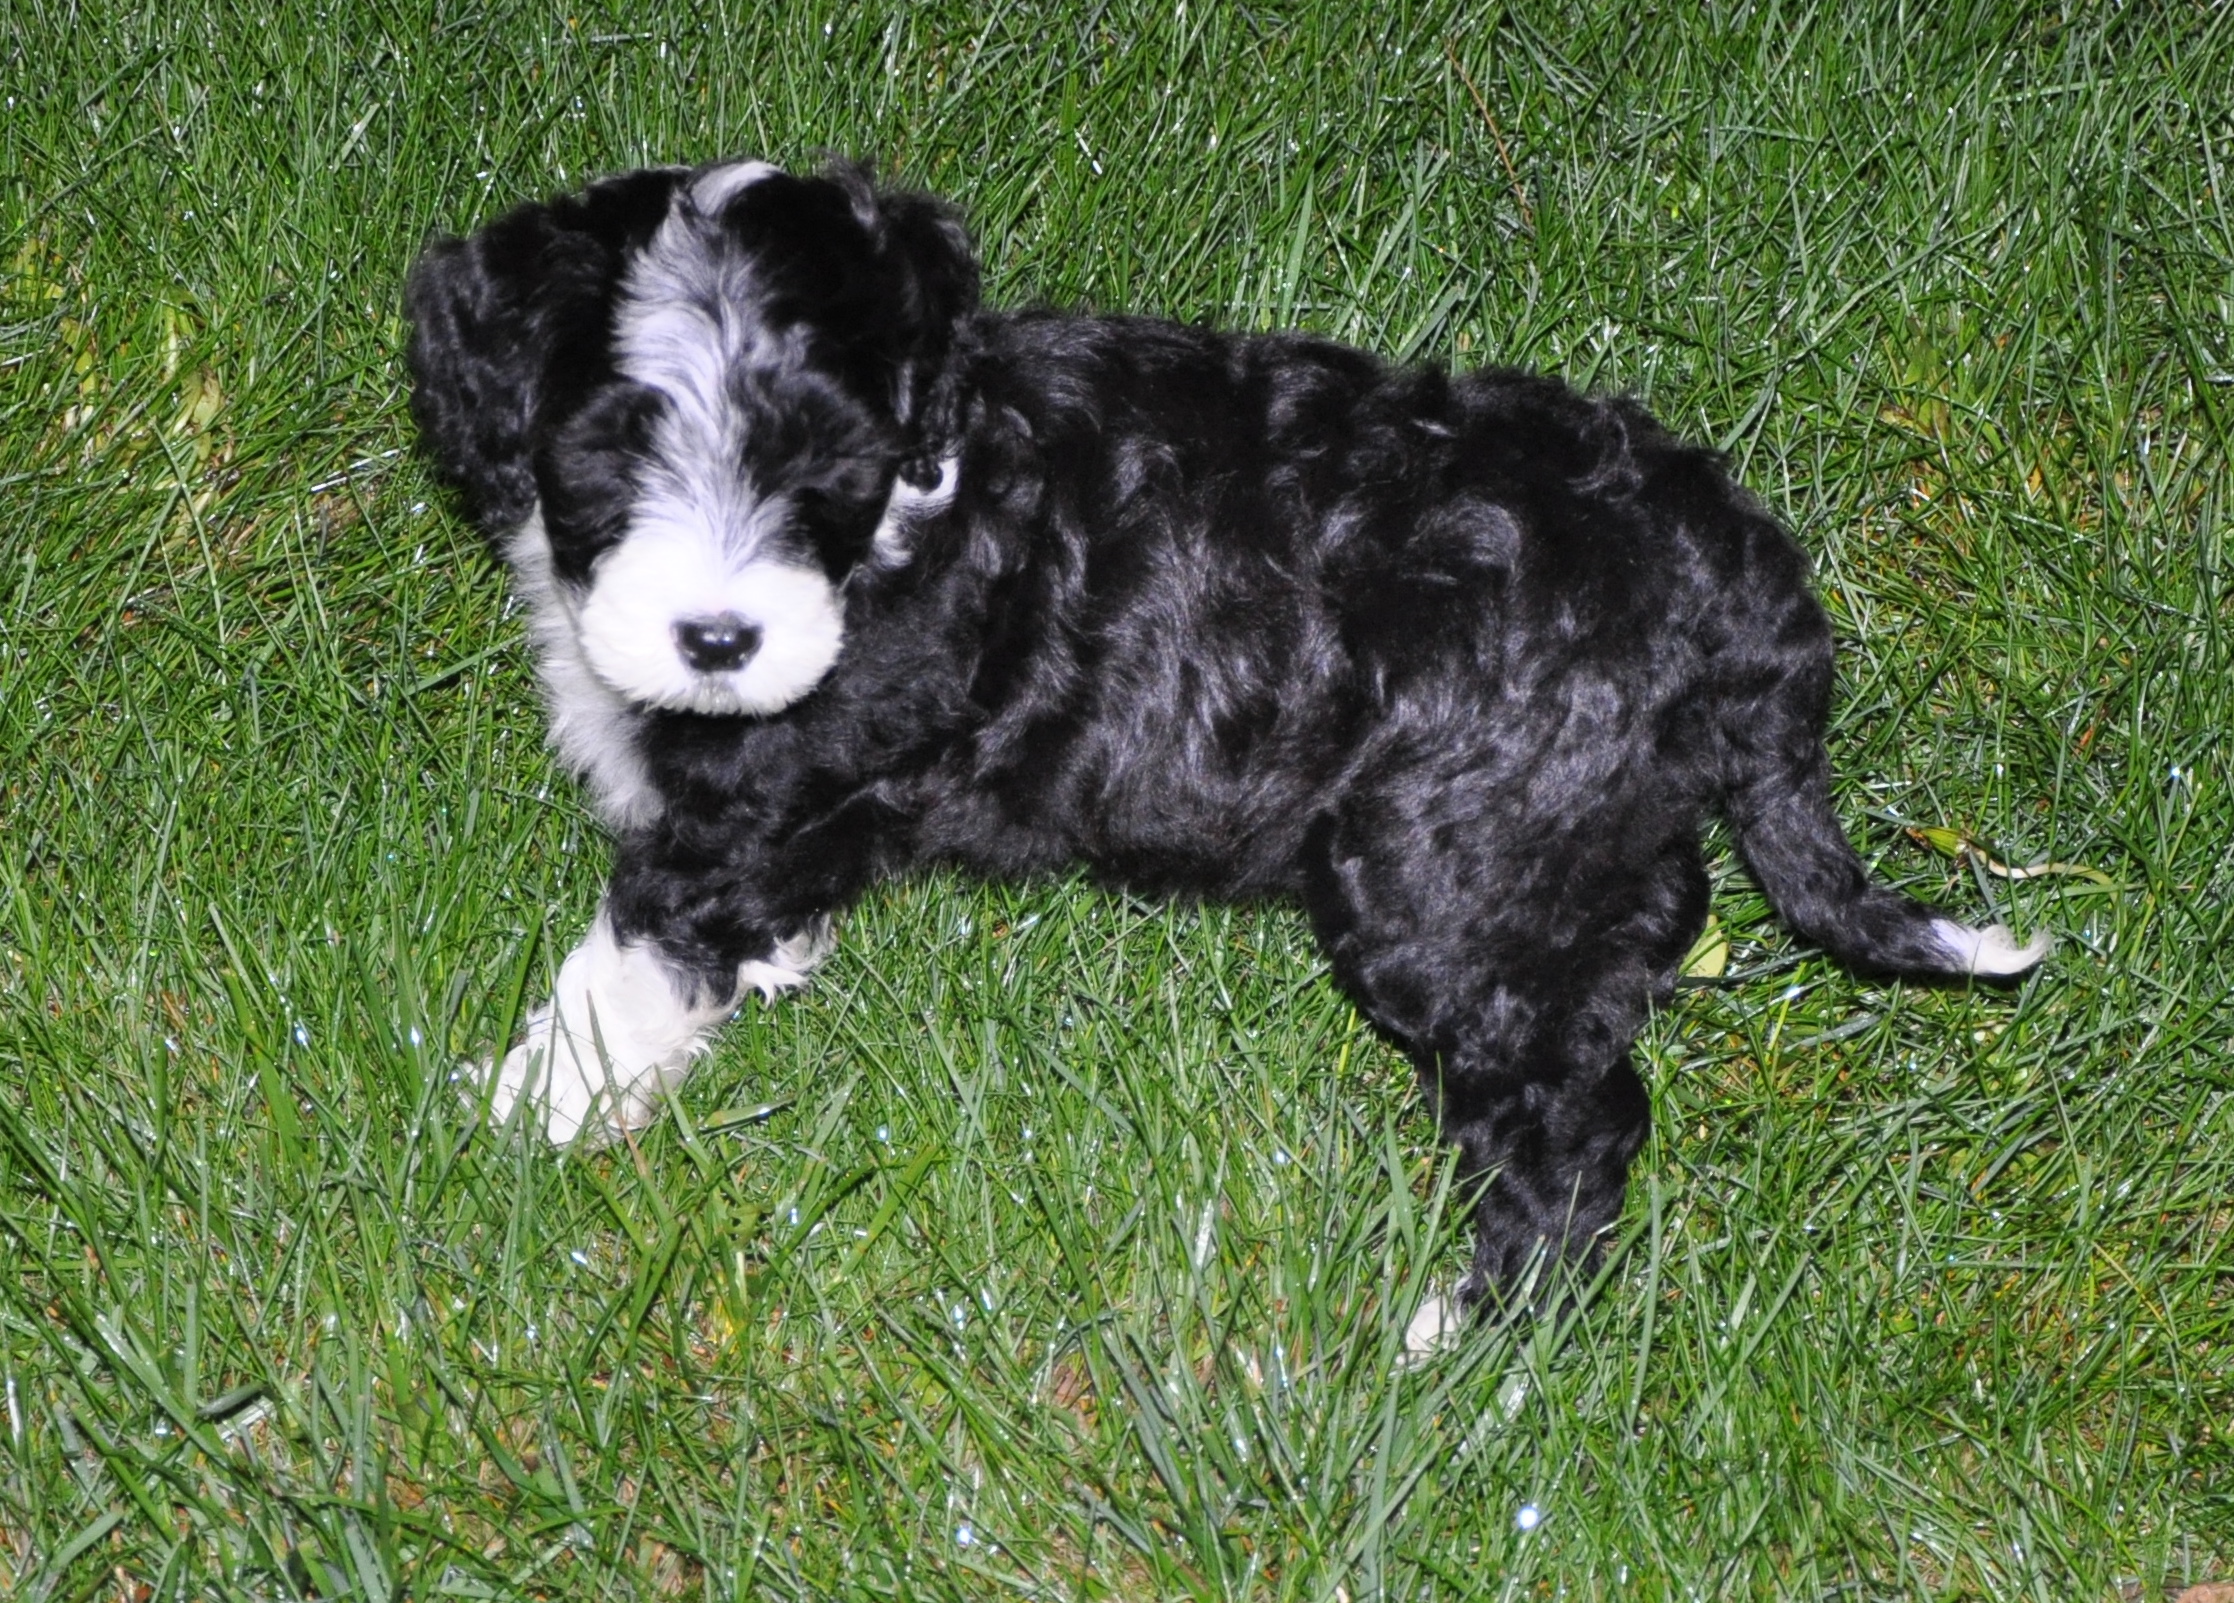 Portuguese Water Dog puppy photo and wallpaper. Beautiful